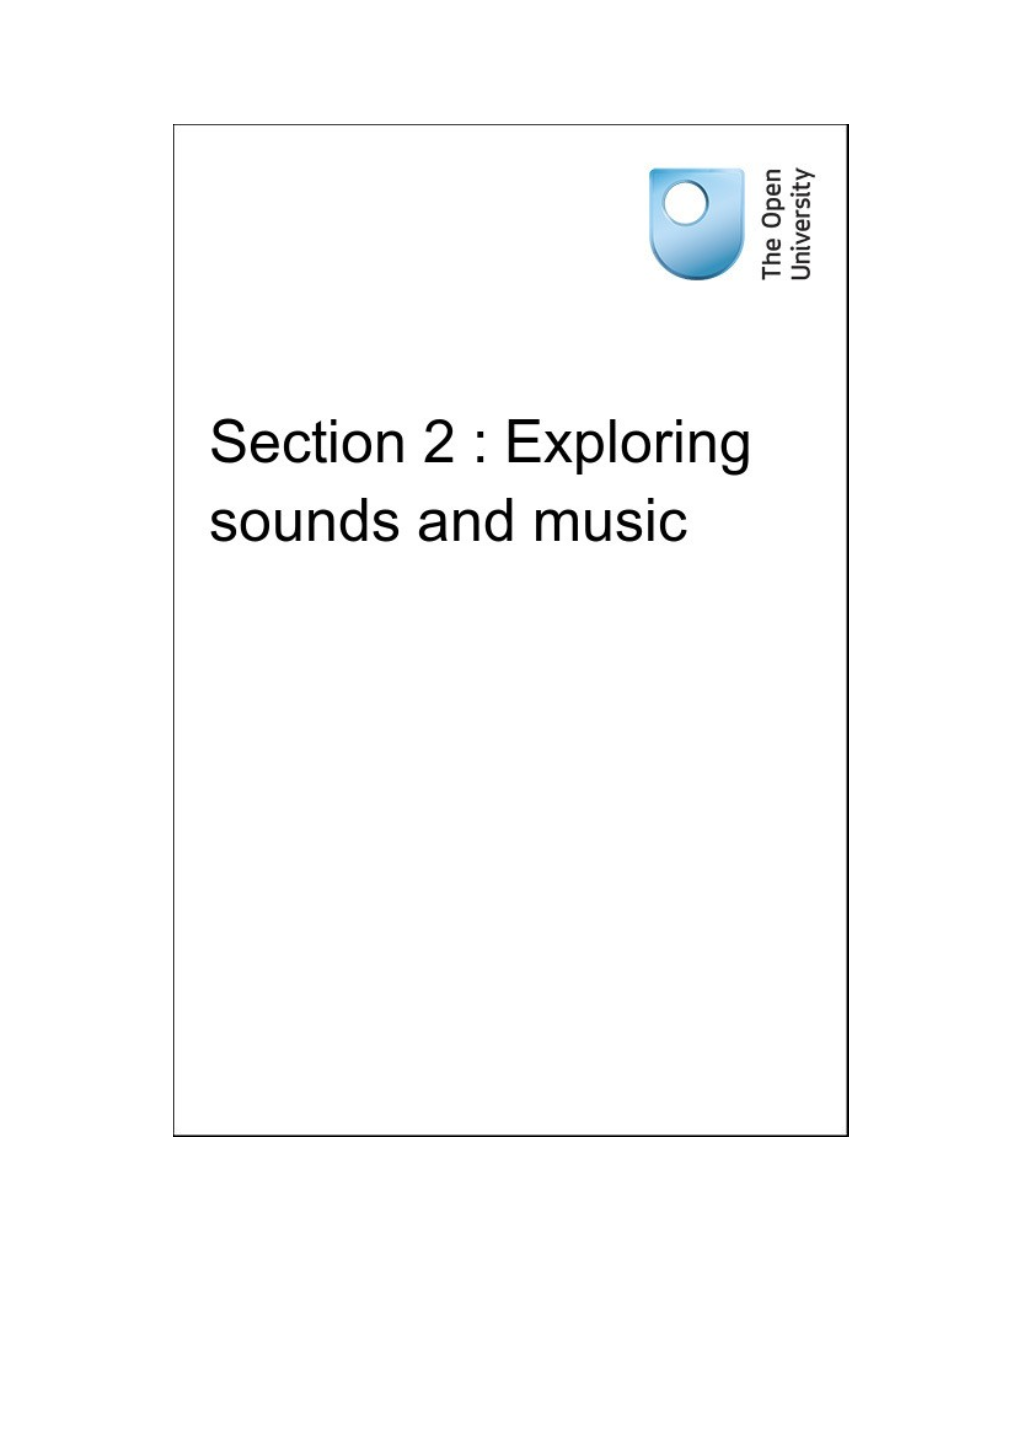 Section 2 : Exploring Sounds and Music